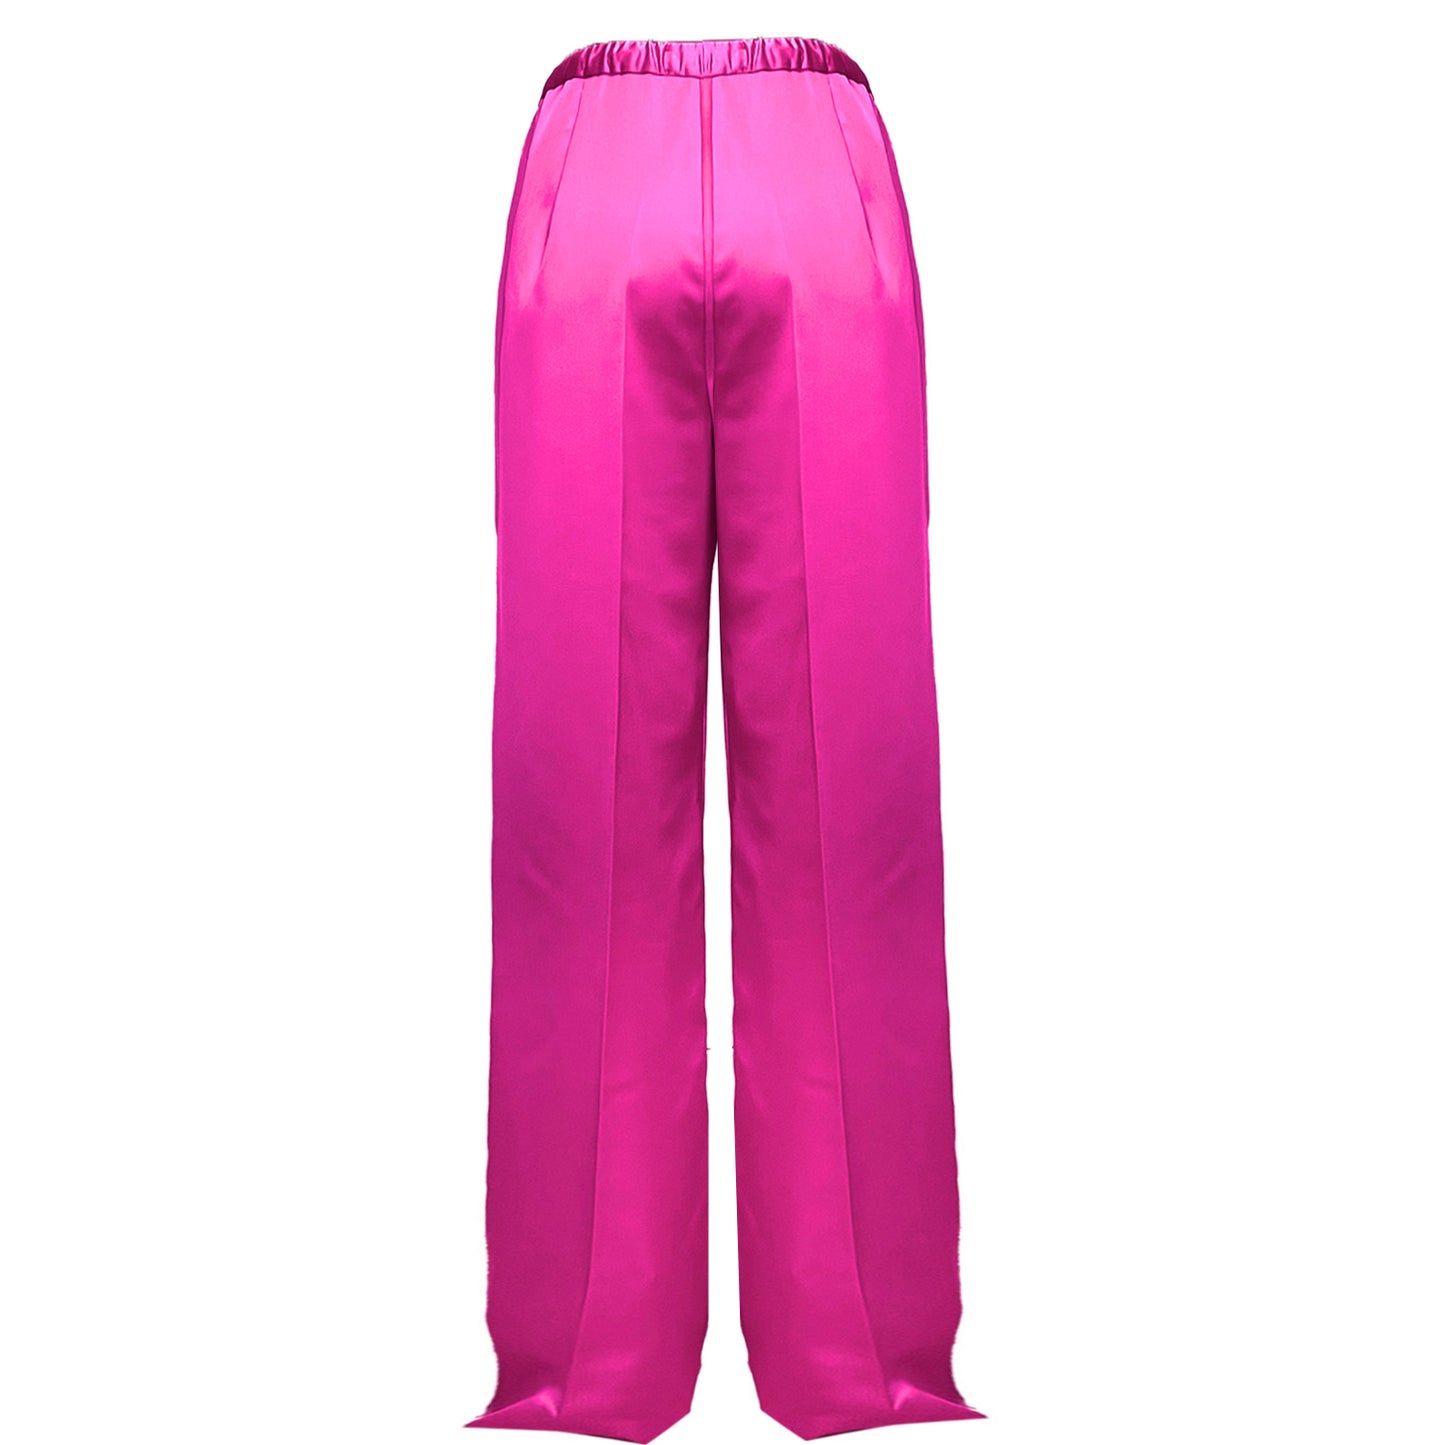 Rothko Collection Pink Pants